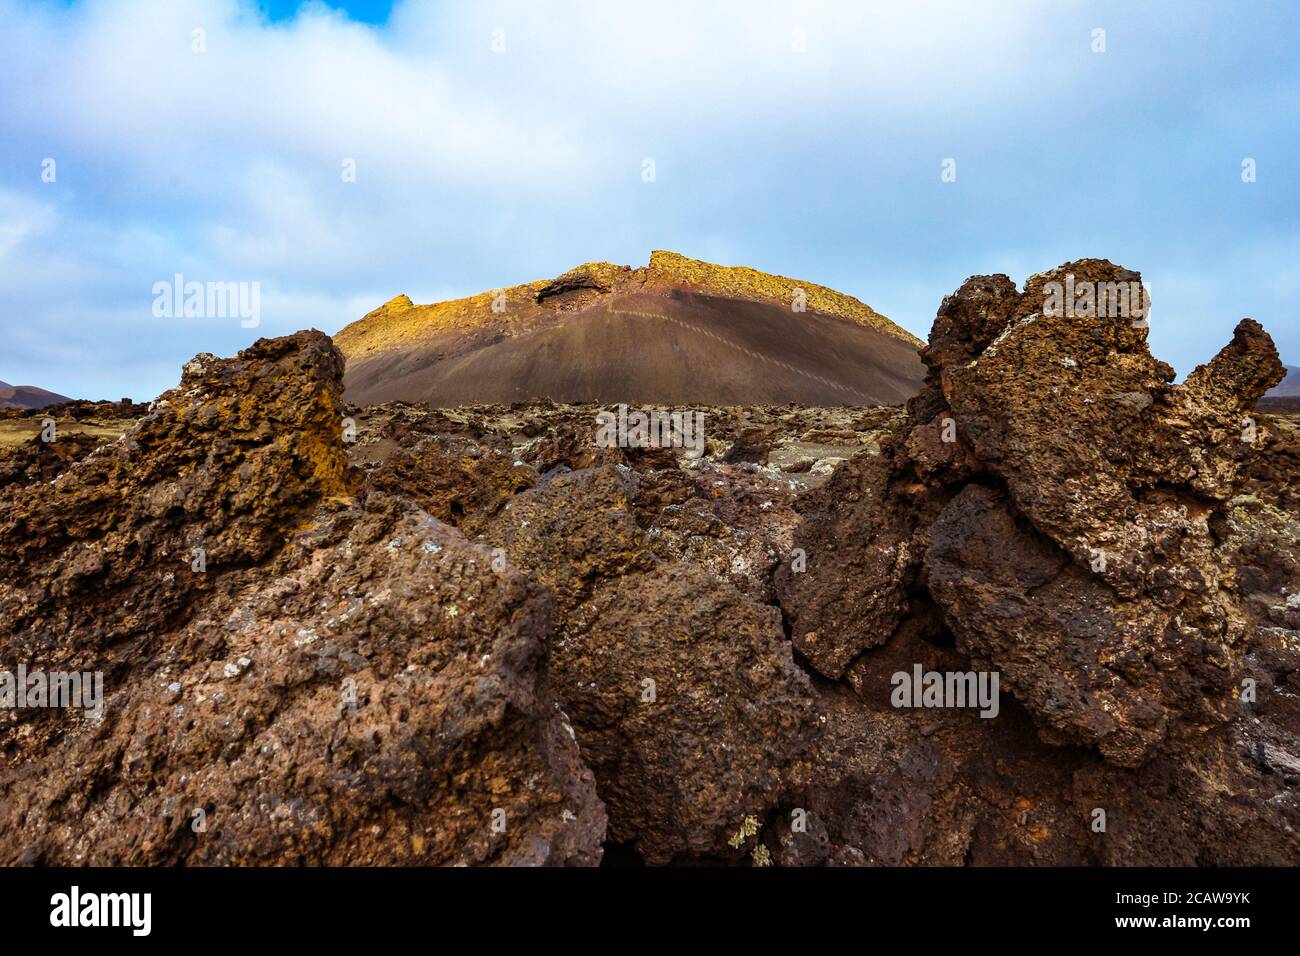 Barren volcanic landscape with El Cuervo ('The Raven') volcano in the Los Volcanes natural park in Lanzarote, Canary Islands, Spain. Stock Photo